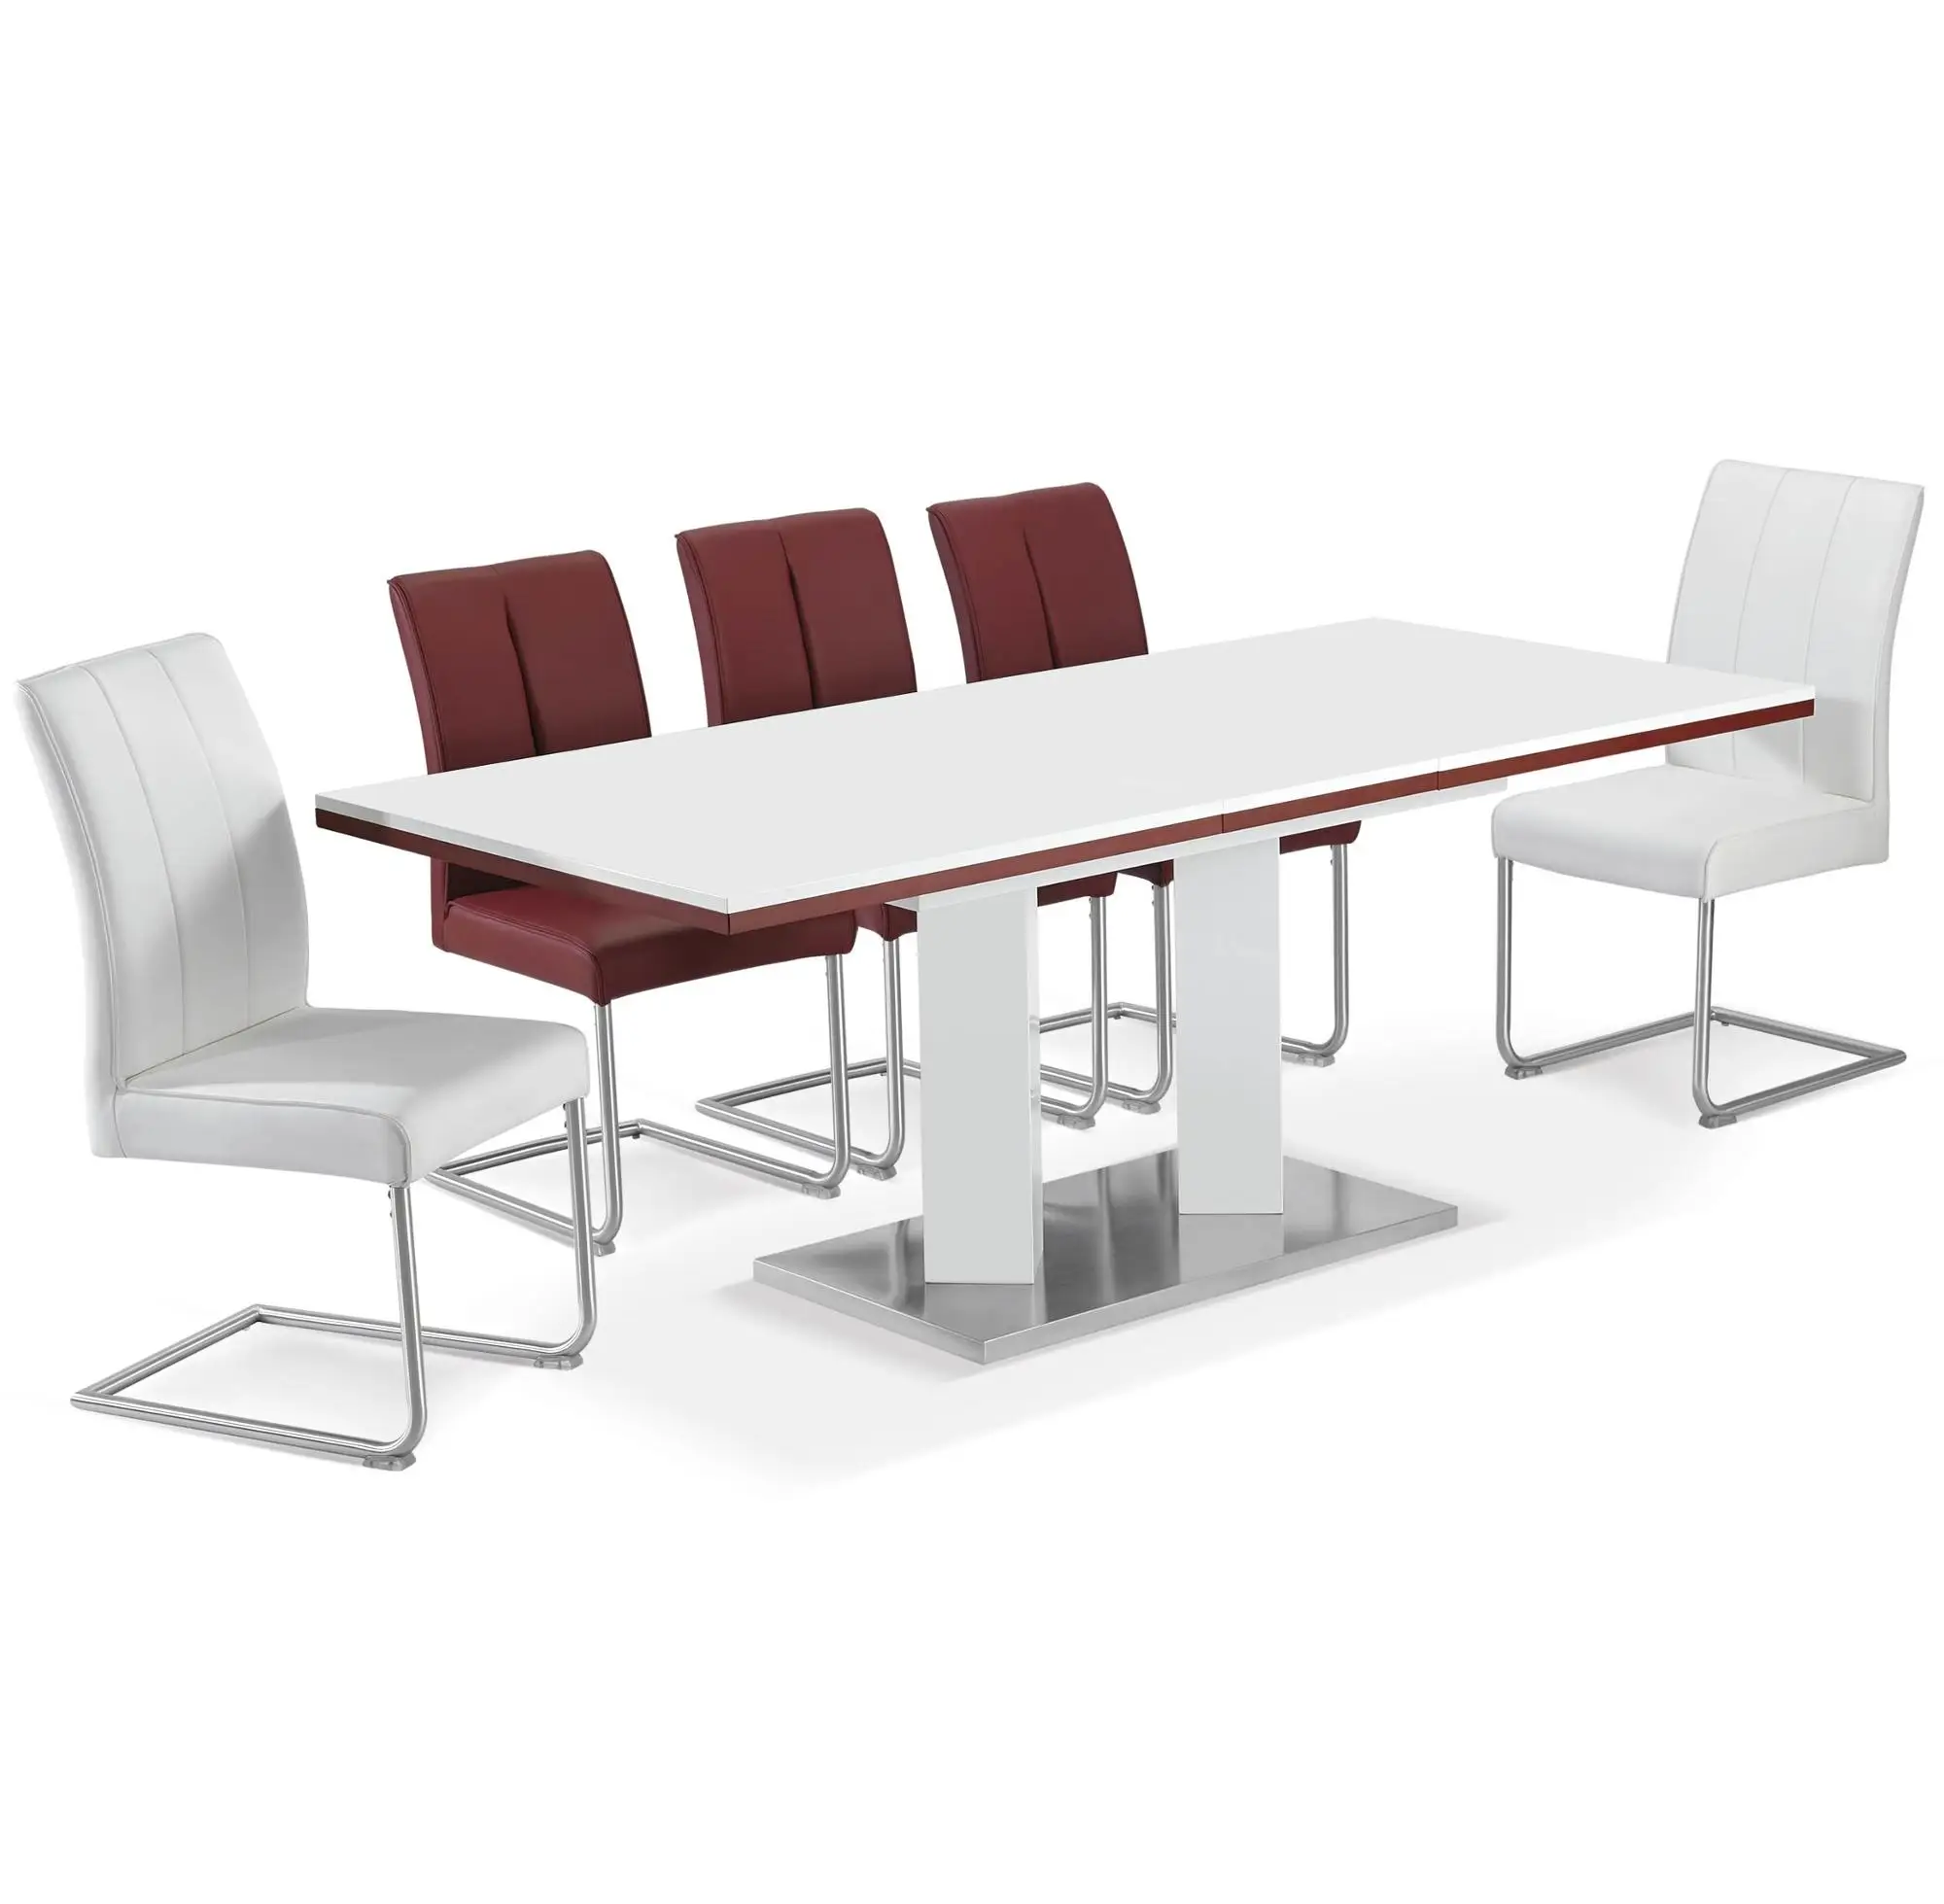 New design High gloss MDF with tempered glass top extending dining tables